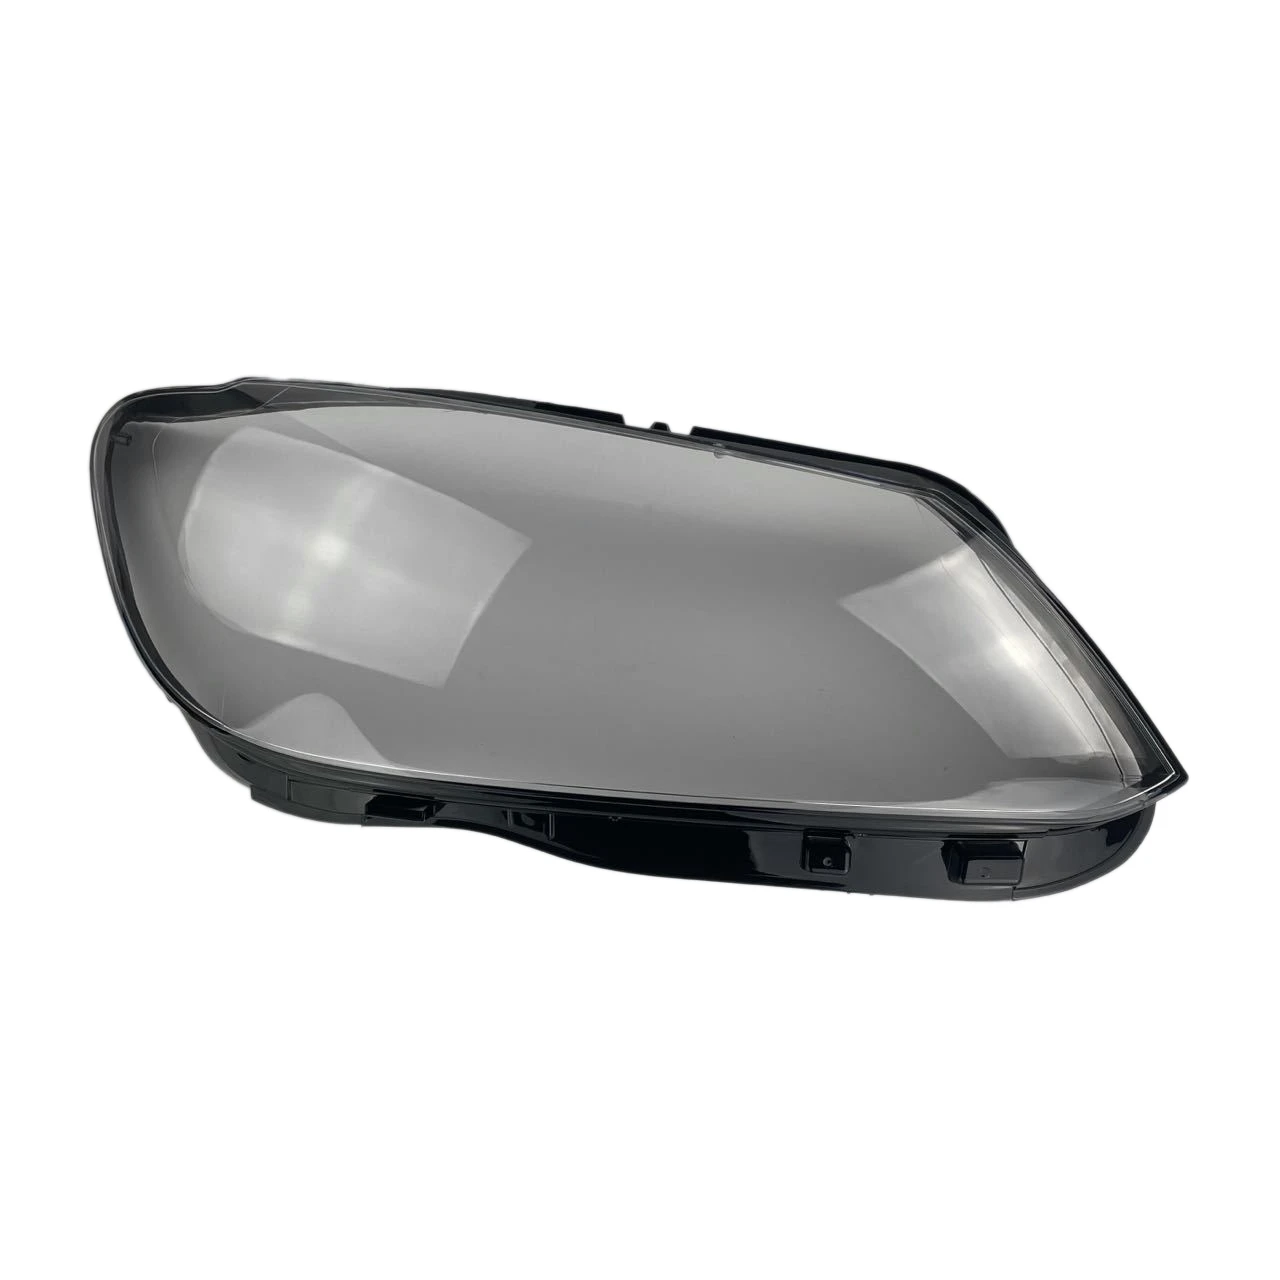 

For Touran 2011 2012 2013 2014 2015 Right Headlight Shell Lamp Shade Transparent Lens Cover Headlight Cover